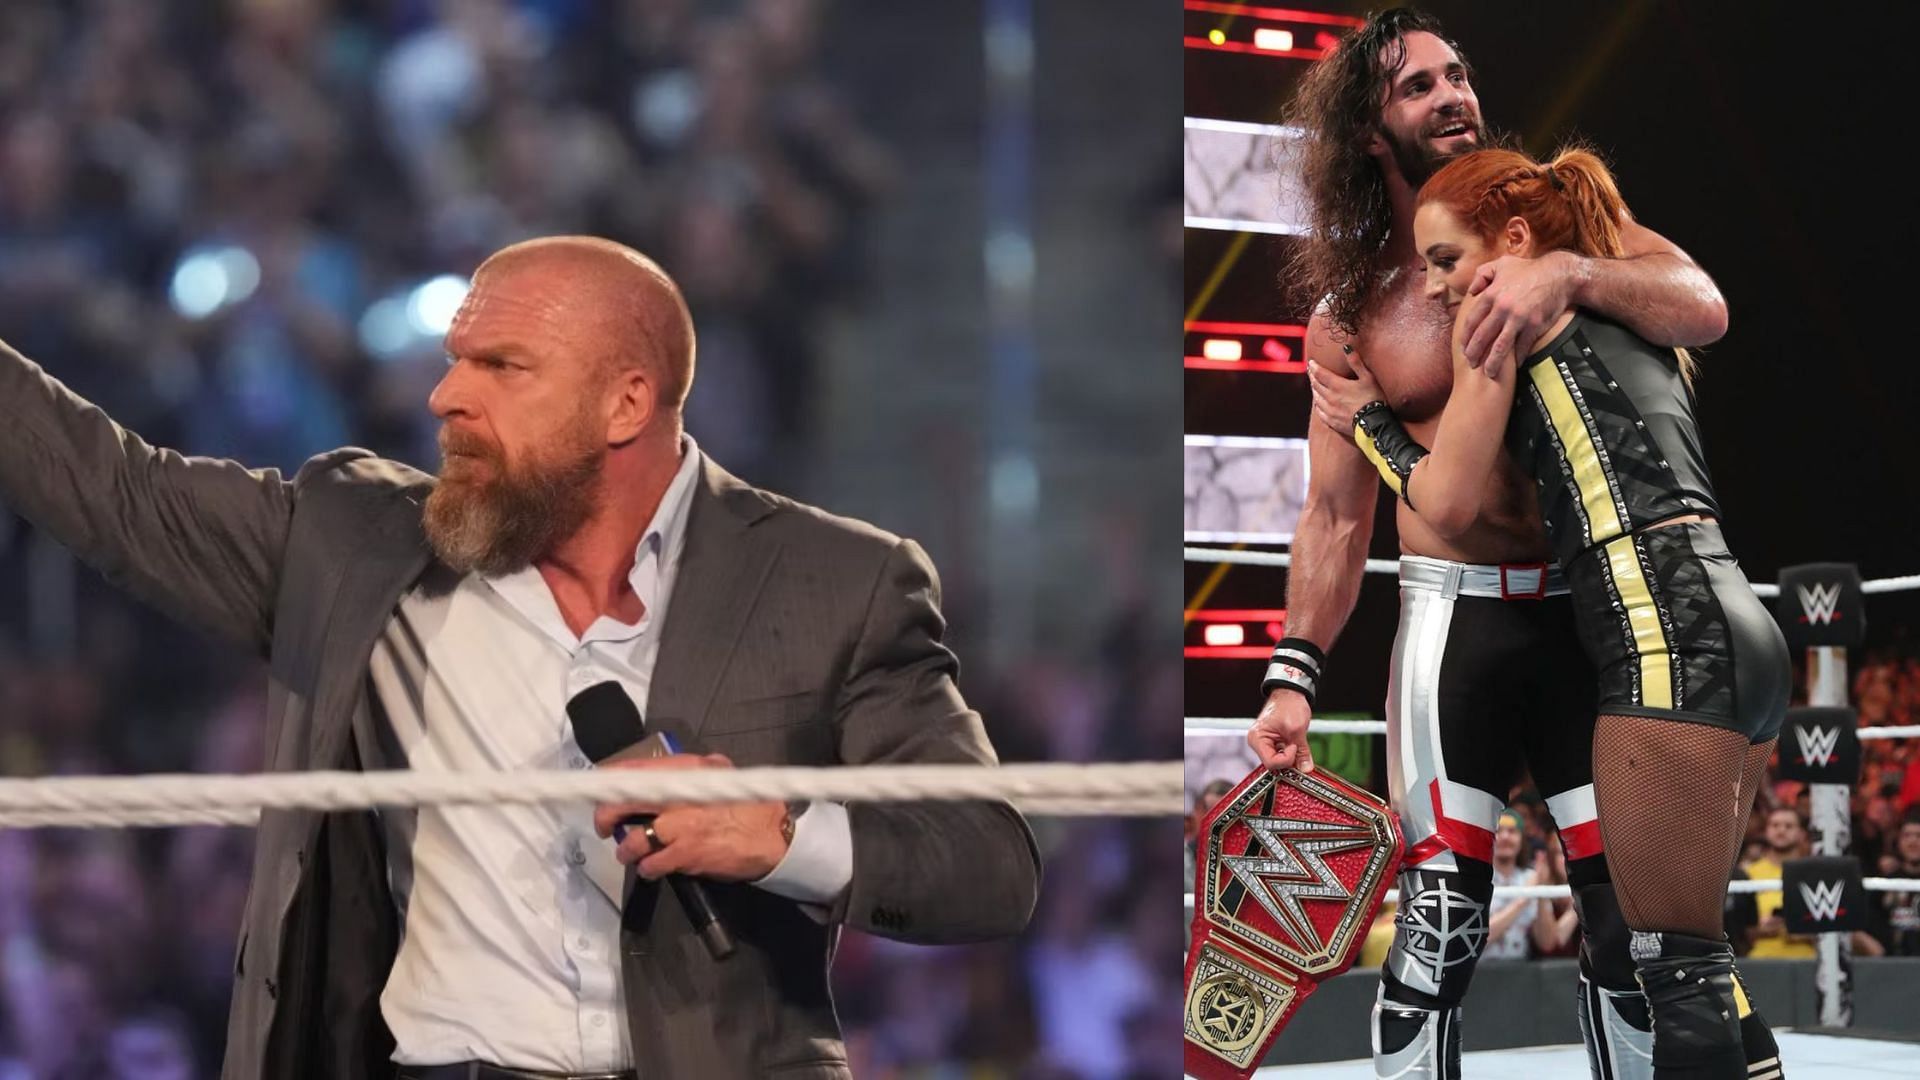 Times are changing in WWE and there might be something new planned